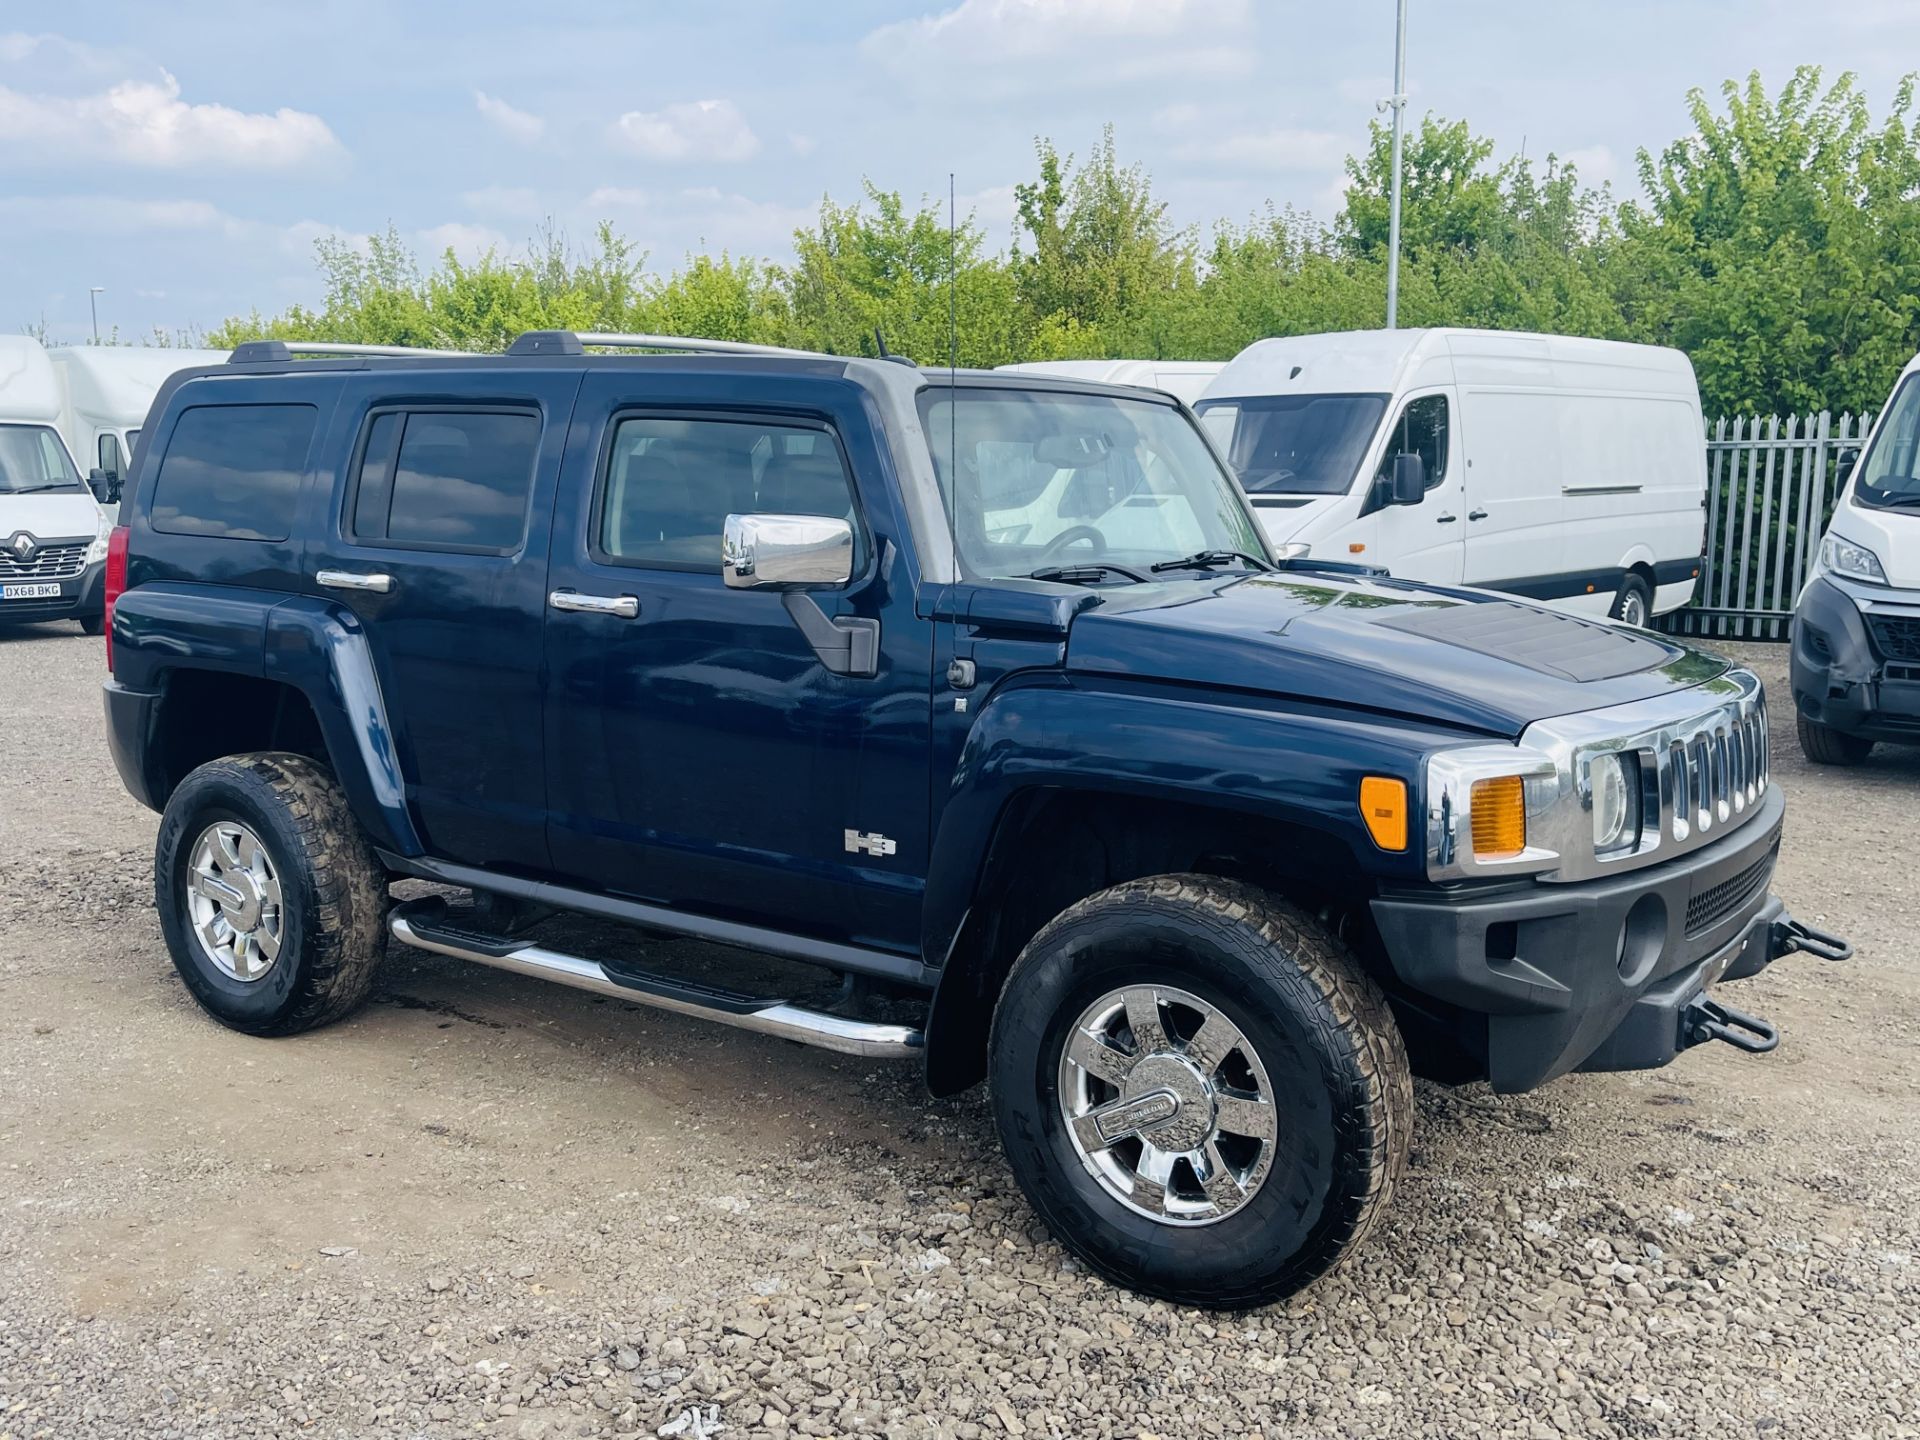 ** ON SALE ** HUMMER H3 3.7L I5 DOHC ' 2007 Year' 4WD ** RARE ** ULEZ Compliant - A/C - LHD - Image 13 of 28